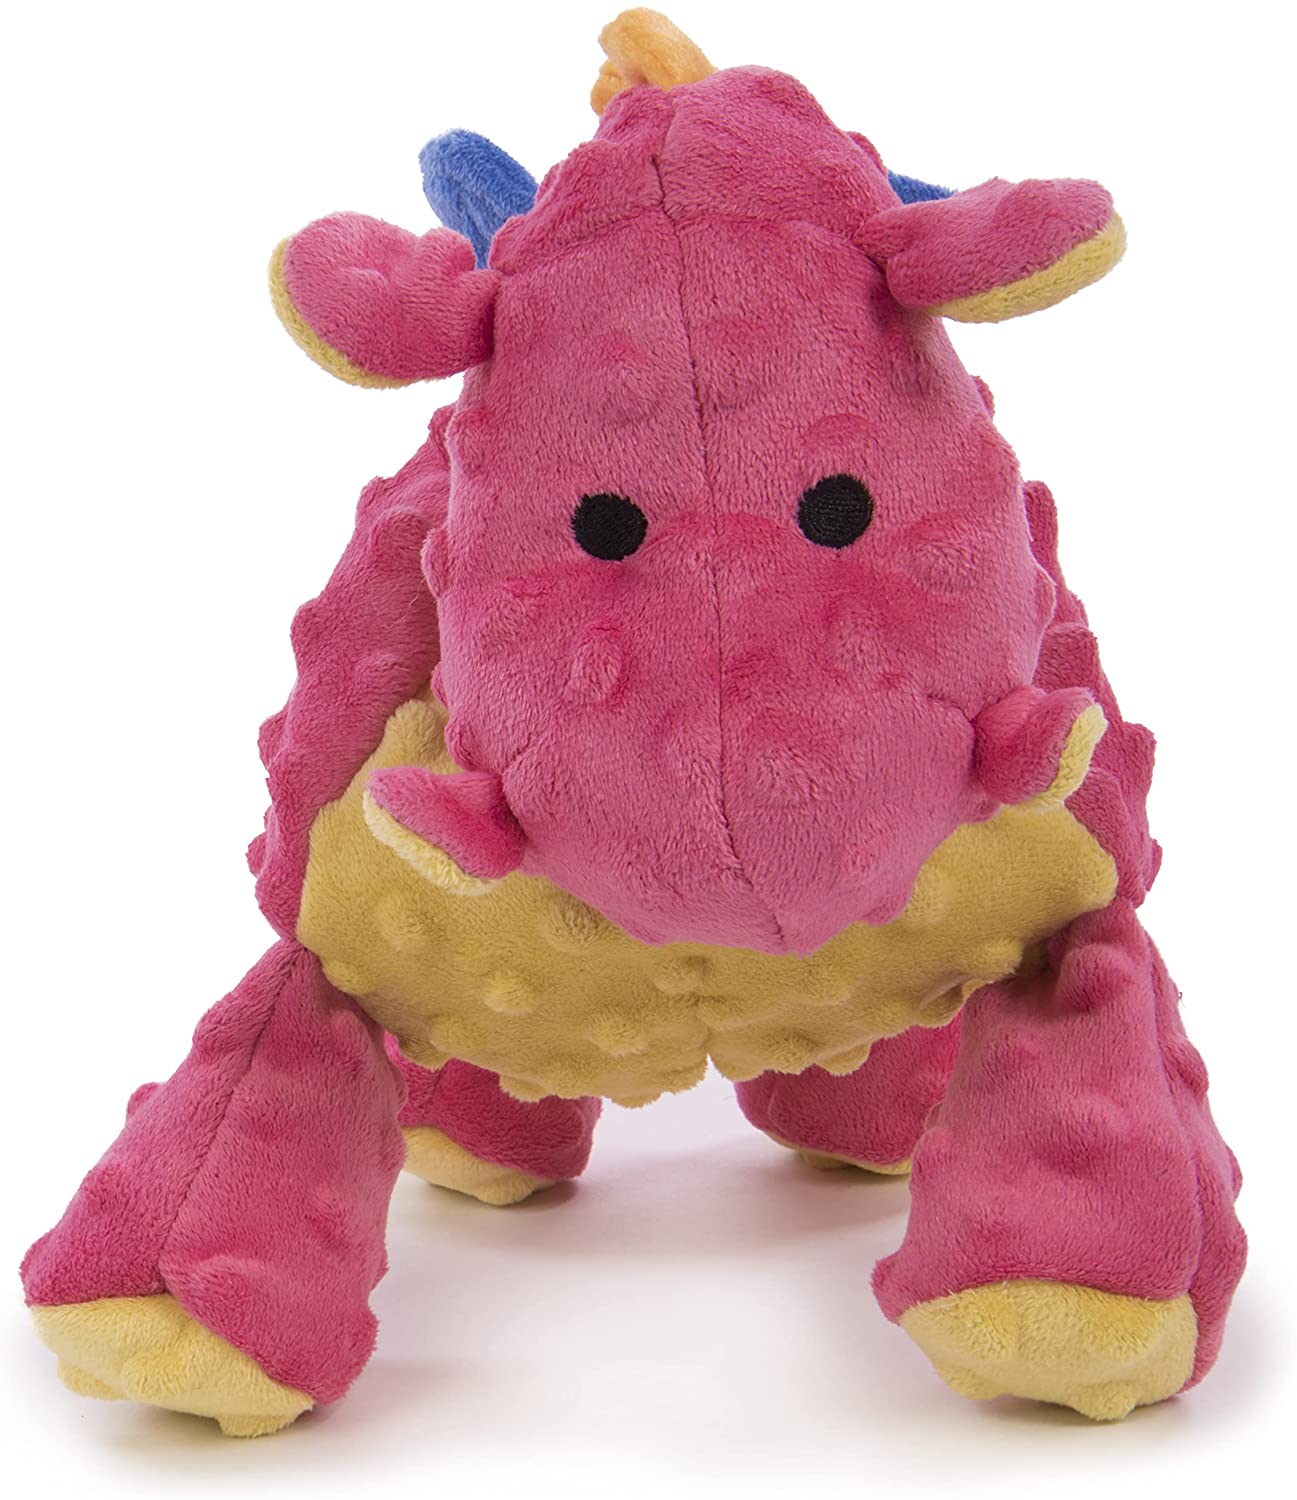 goDog® Dragons™  with Chew Guard Technology™ Durable Plush Squeaker Dog Toy, Pink. Small